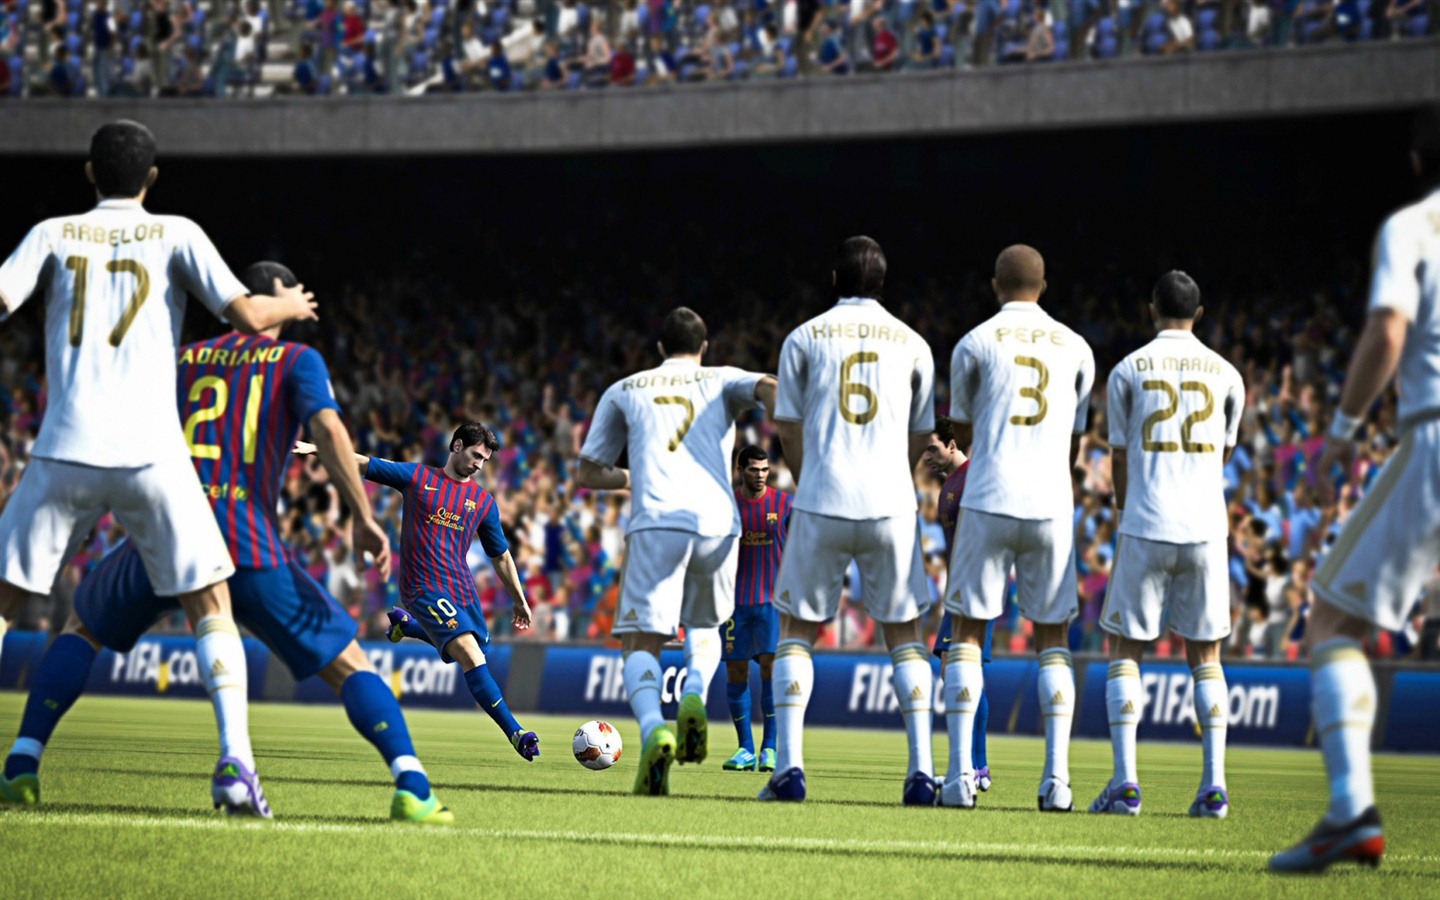 FIFA 13 game HD wallpapers #9 - 1440x900